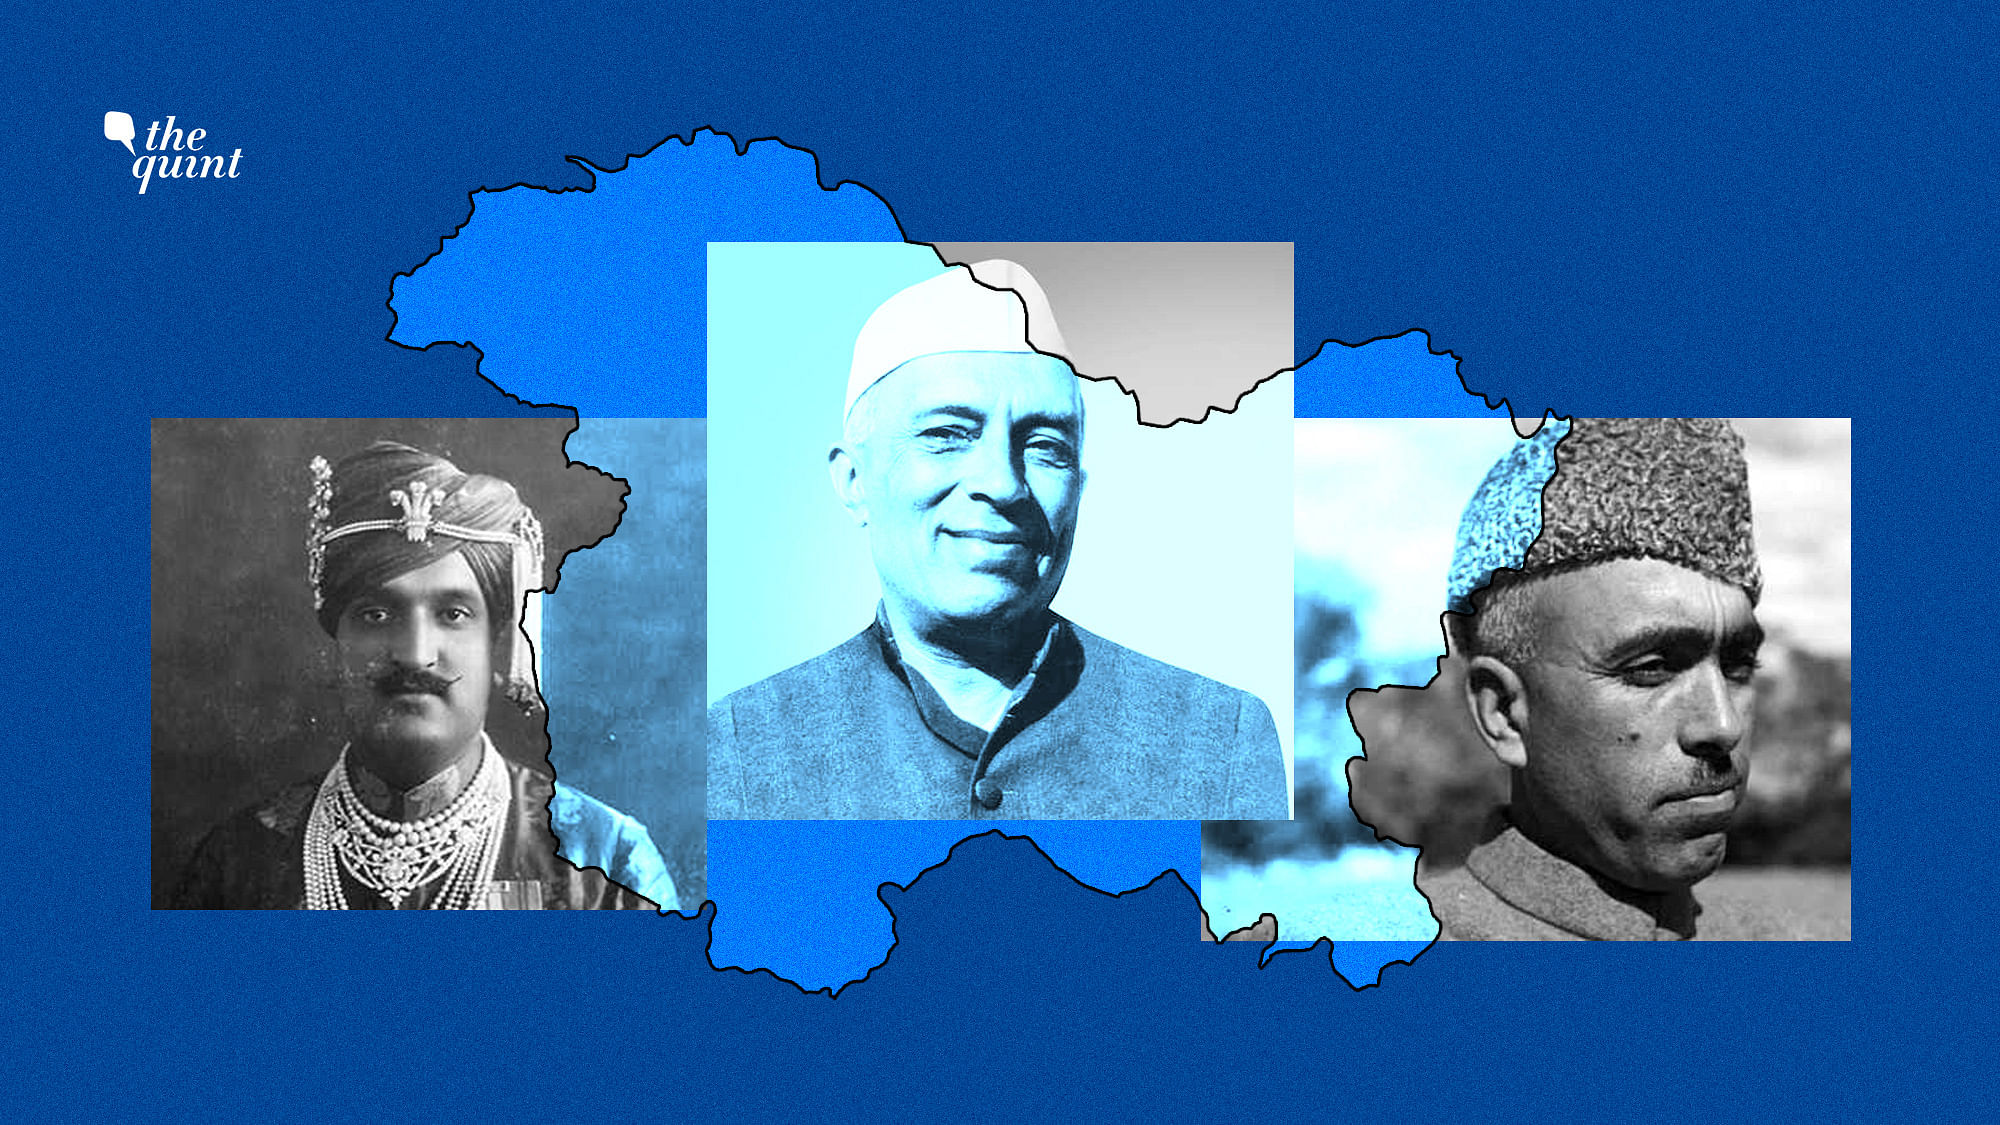 What are the roots of the Kashmir conflict? Why did accession of Kashmir become a contentious issue?